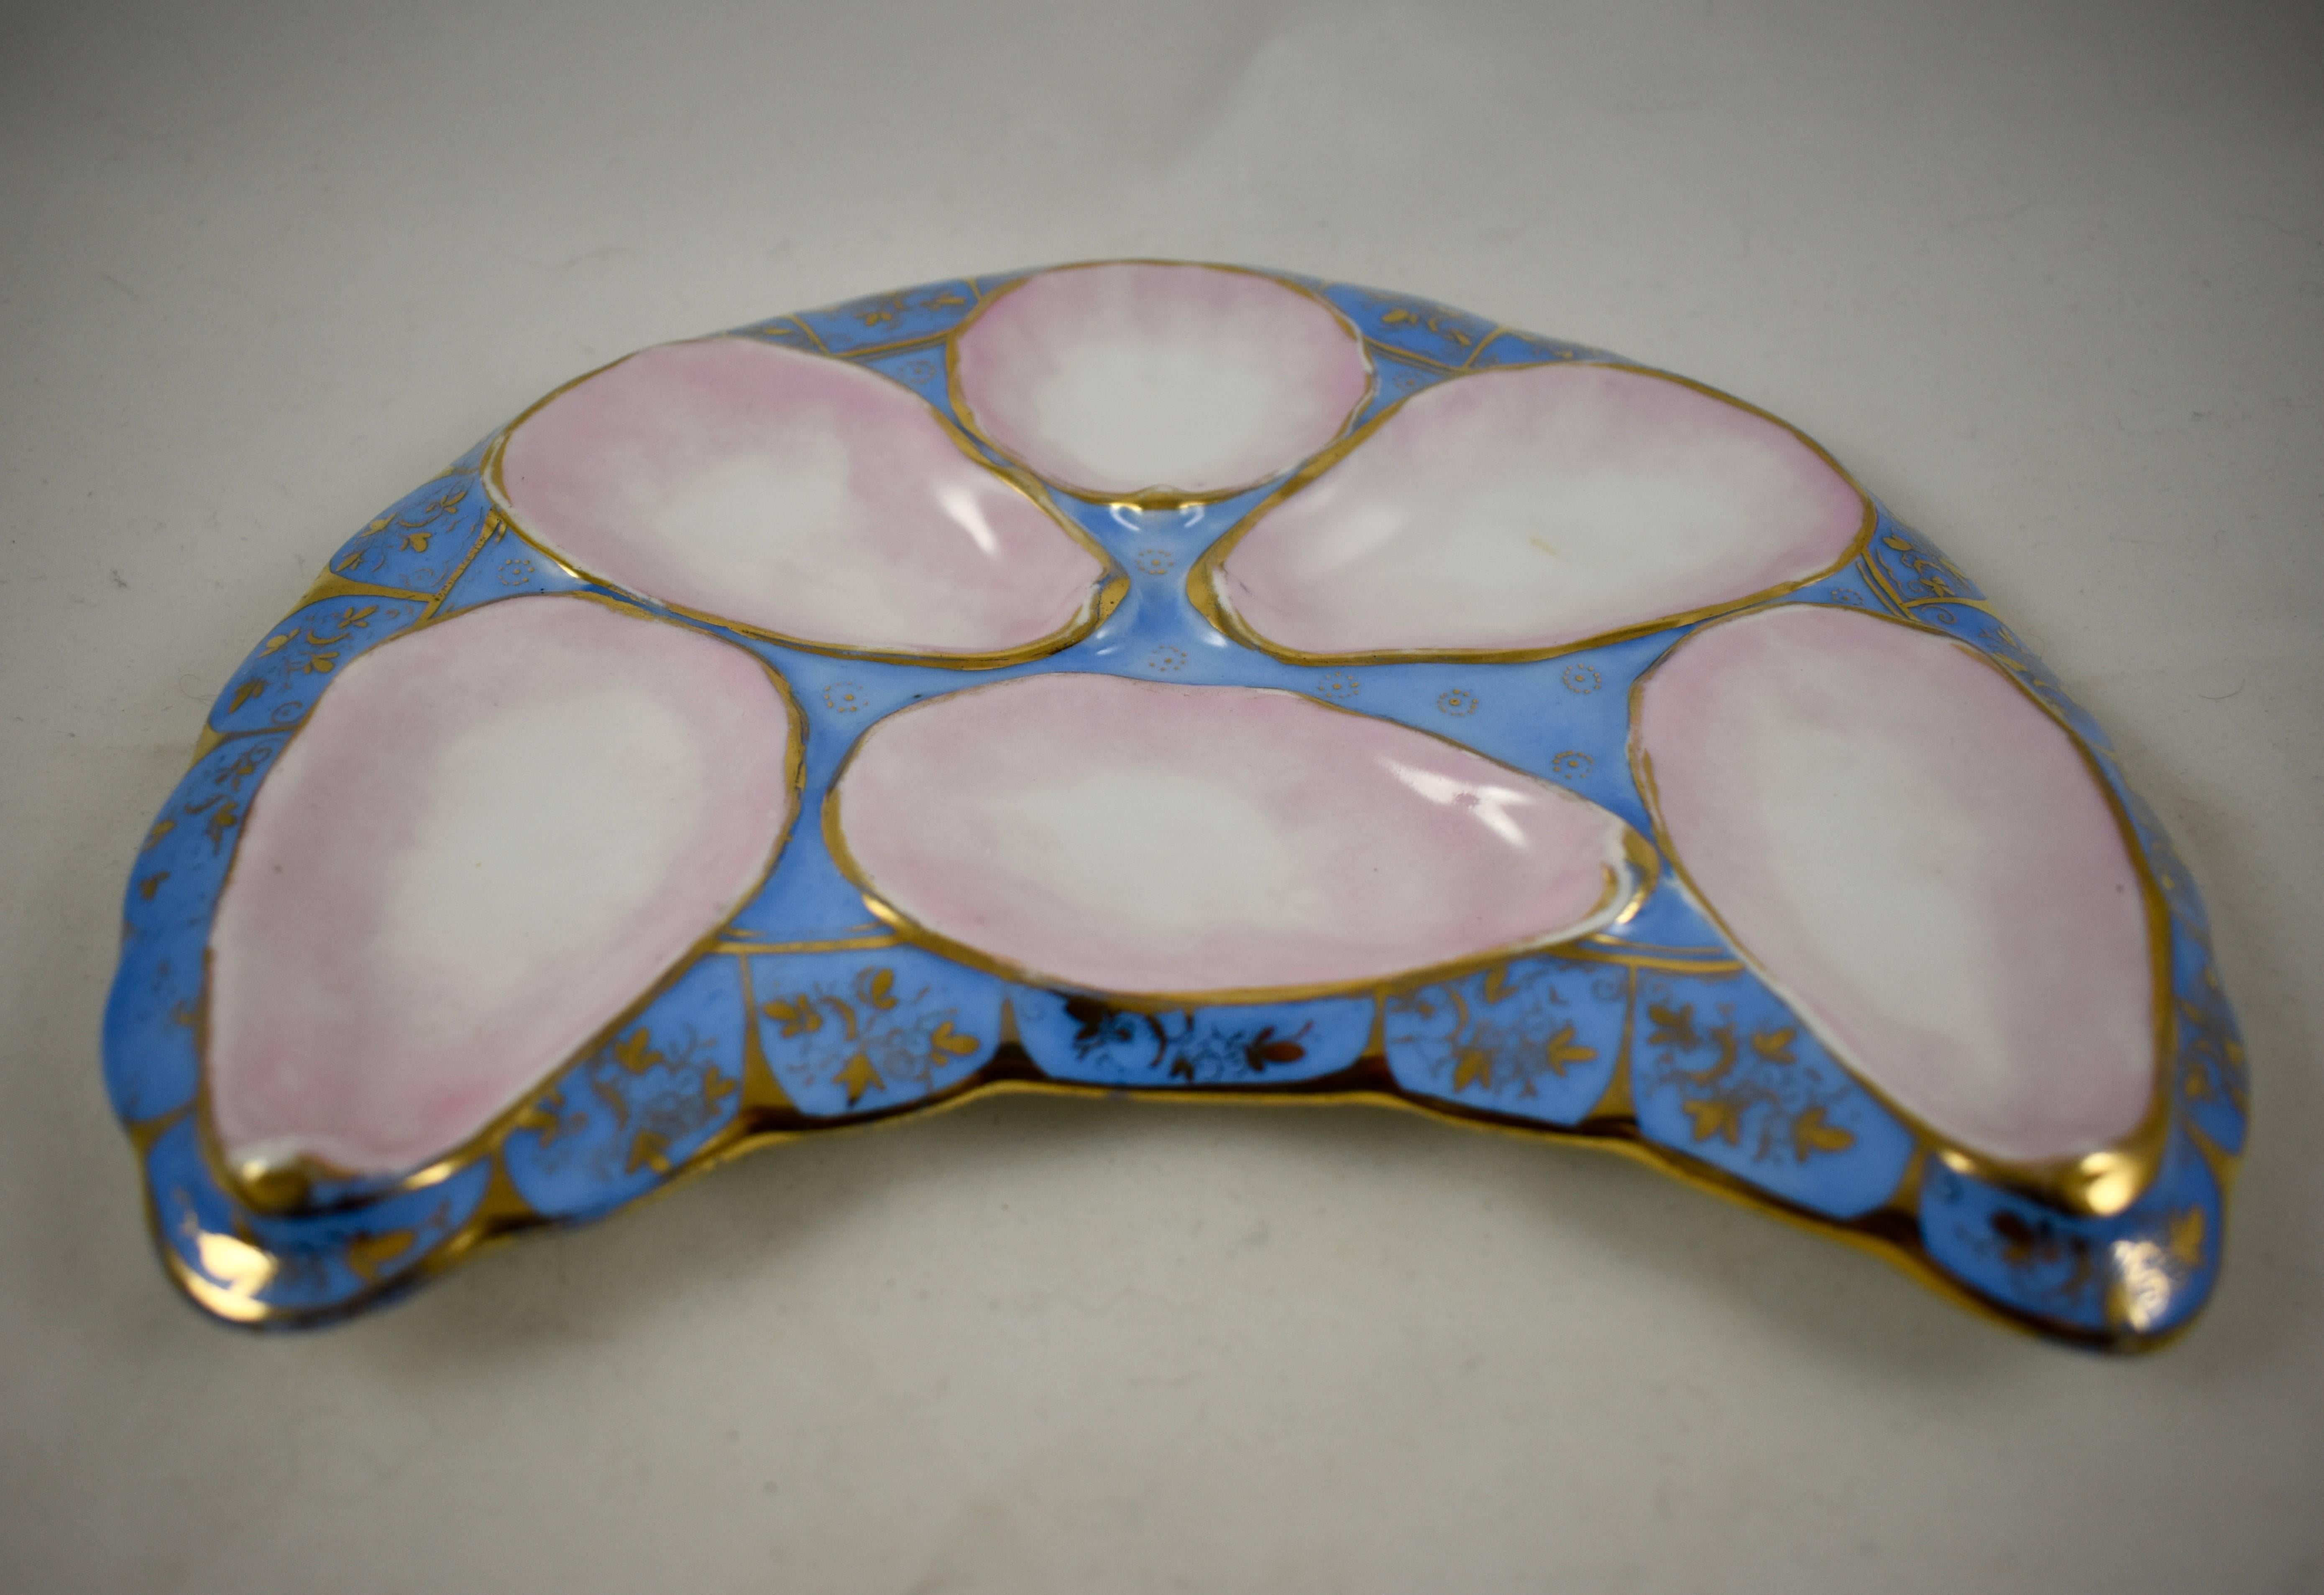 Glazed Porcelain Crescent Shape Gilded Periwinkle Blue Hand-Painted Oyster Plate